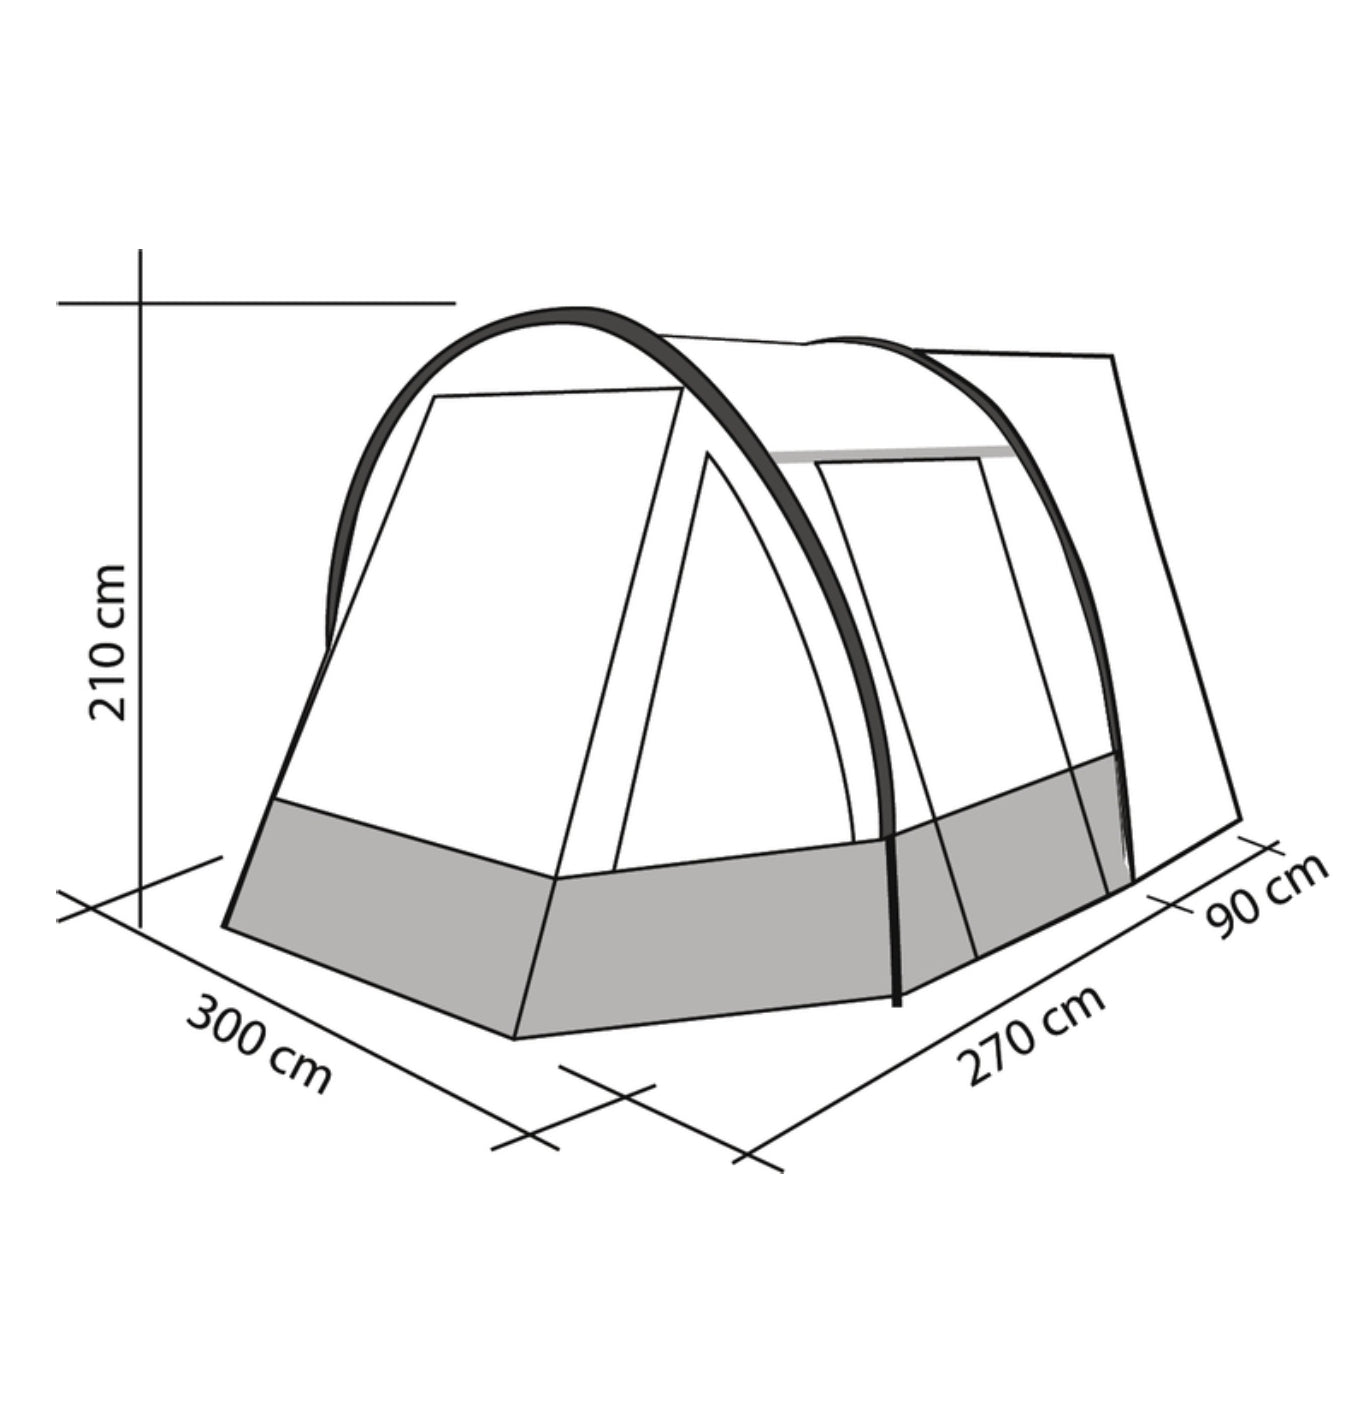 Reimo Tour Easy 4 Drive Away Awning, Inner Tent & Carpet Bundle Image